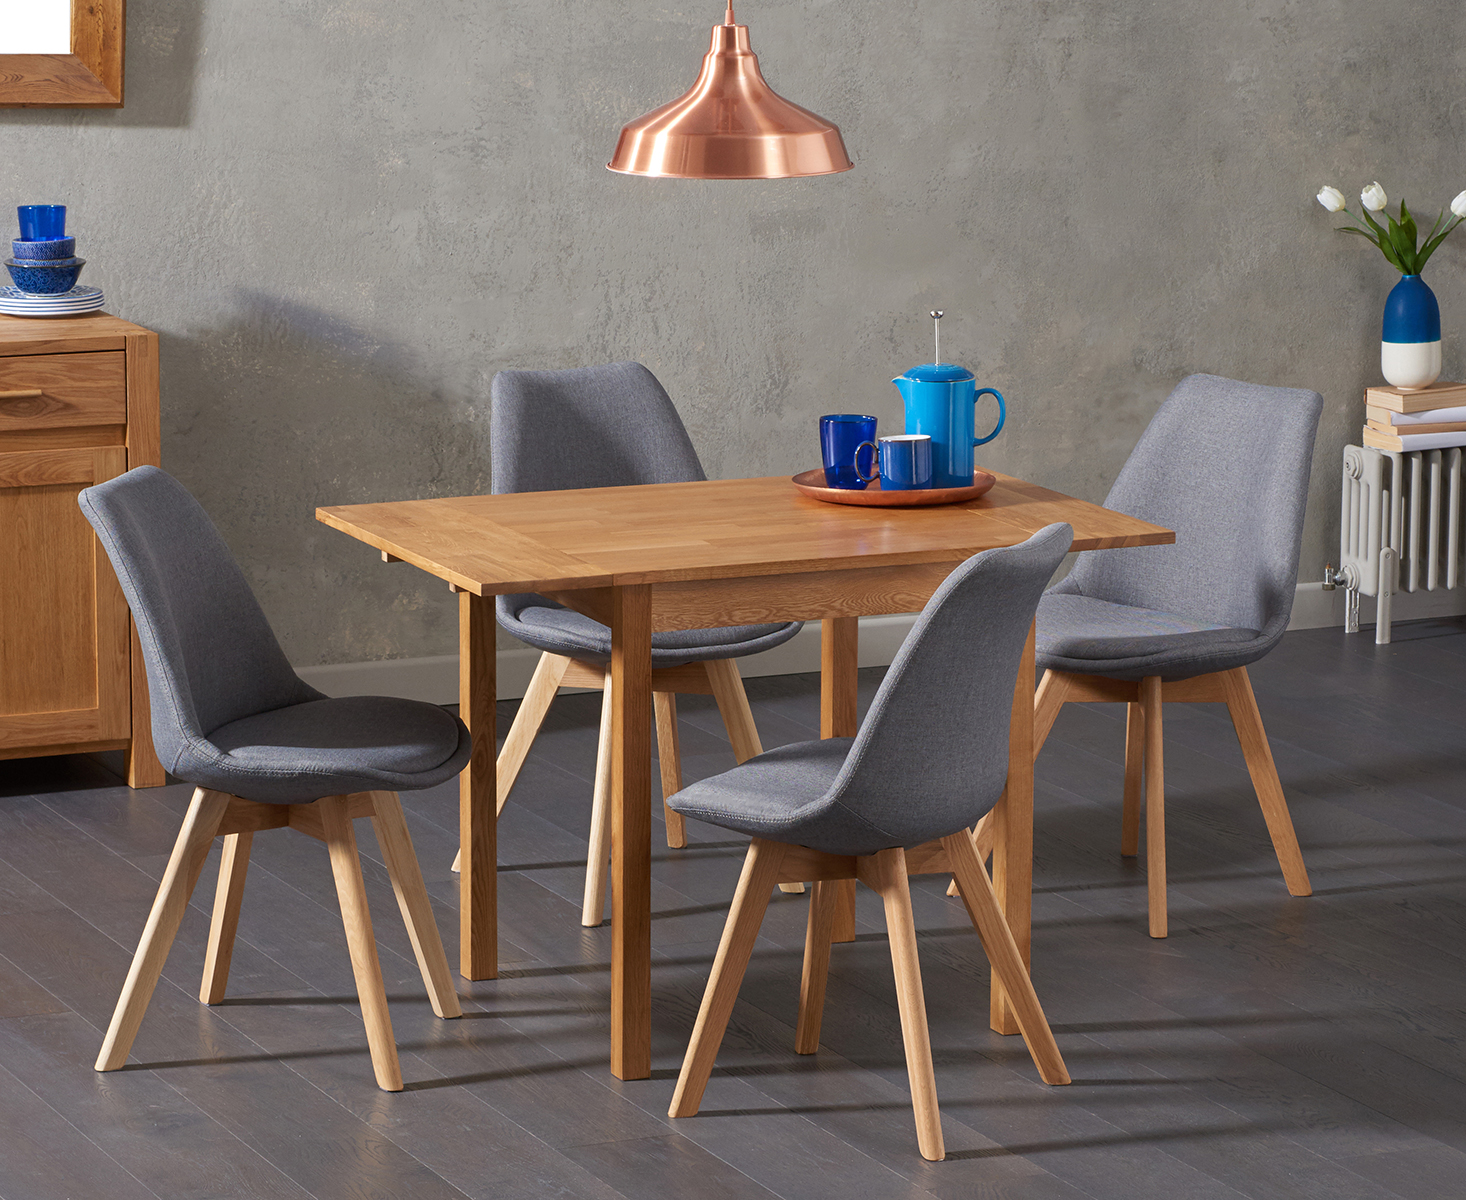 Extending York 70cm Solid Oak Dining Table With 4 Dark Grey Orson Fabric Chairs